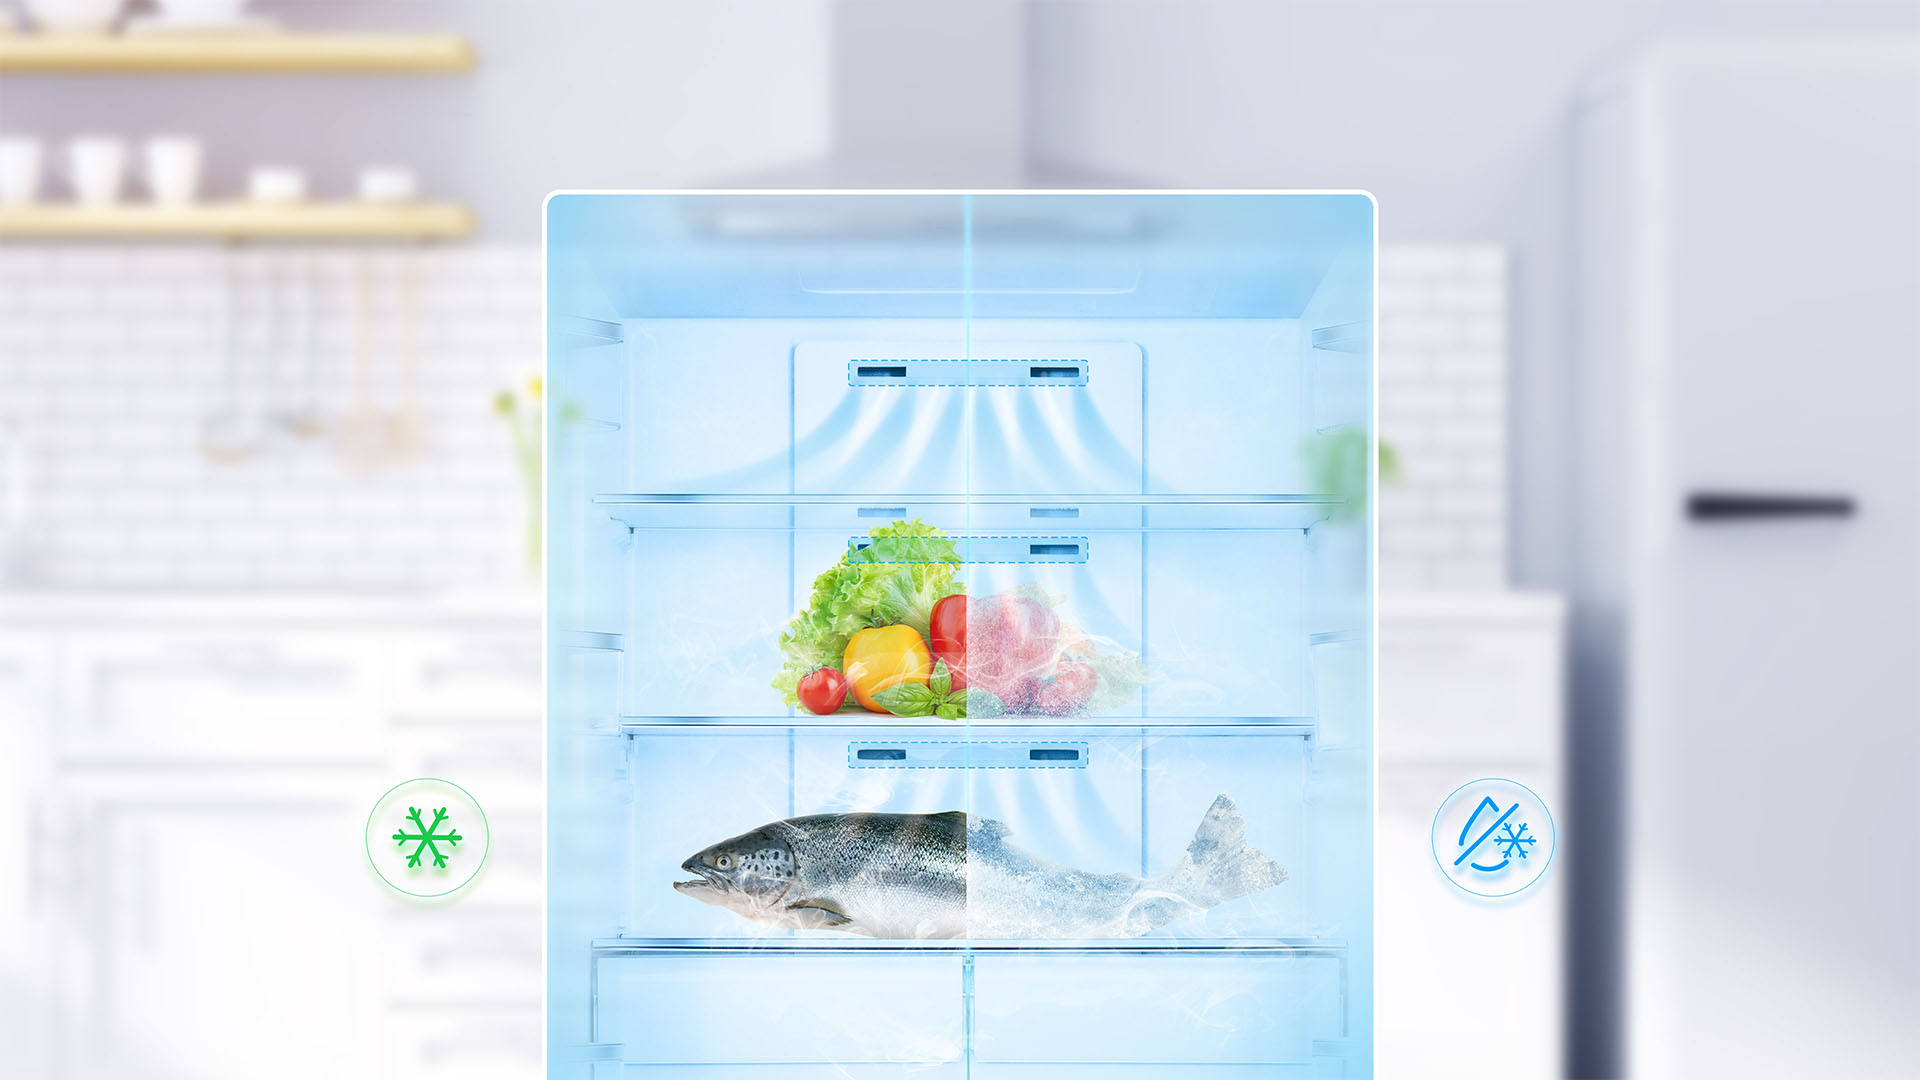 Multi Air Flow: Multi-level cold air distribution for optimal food preservation thanks to a homogeneous cold distribution.